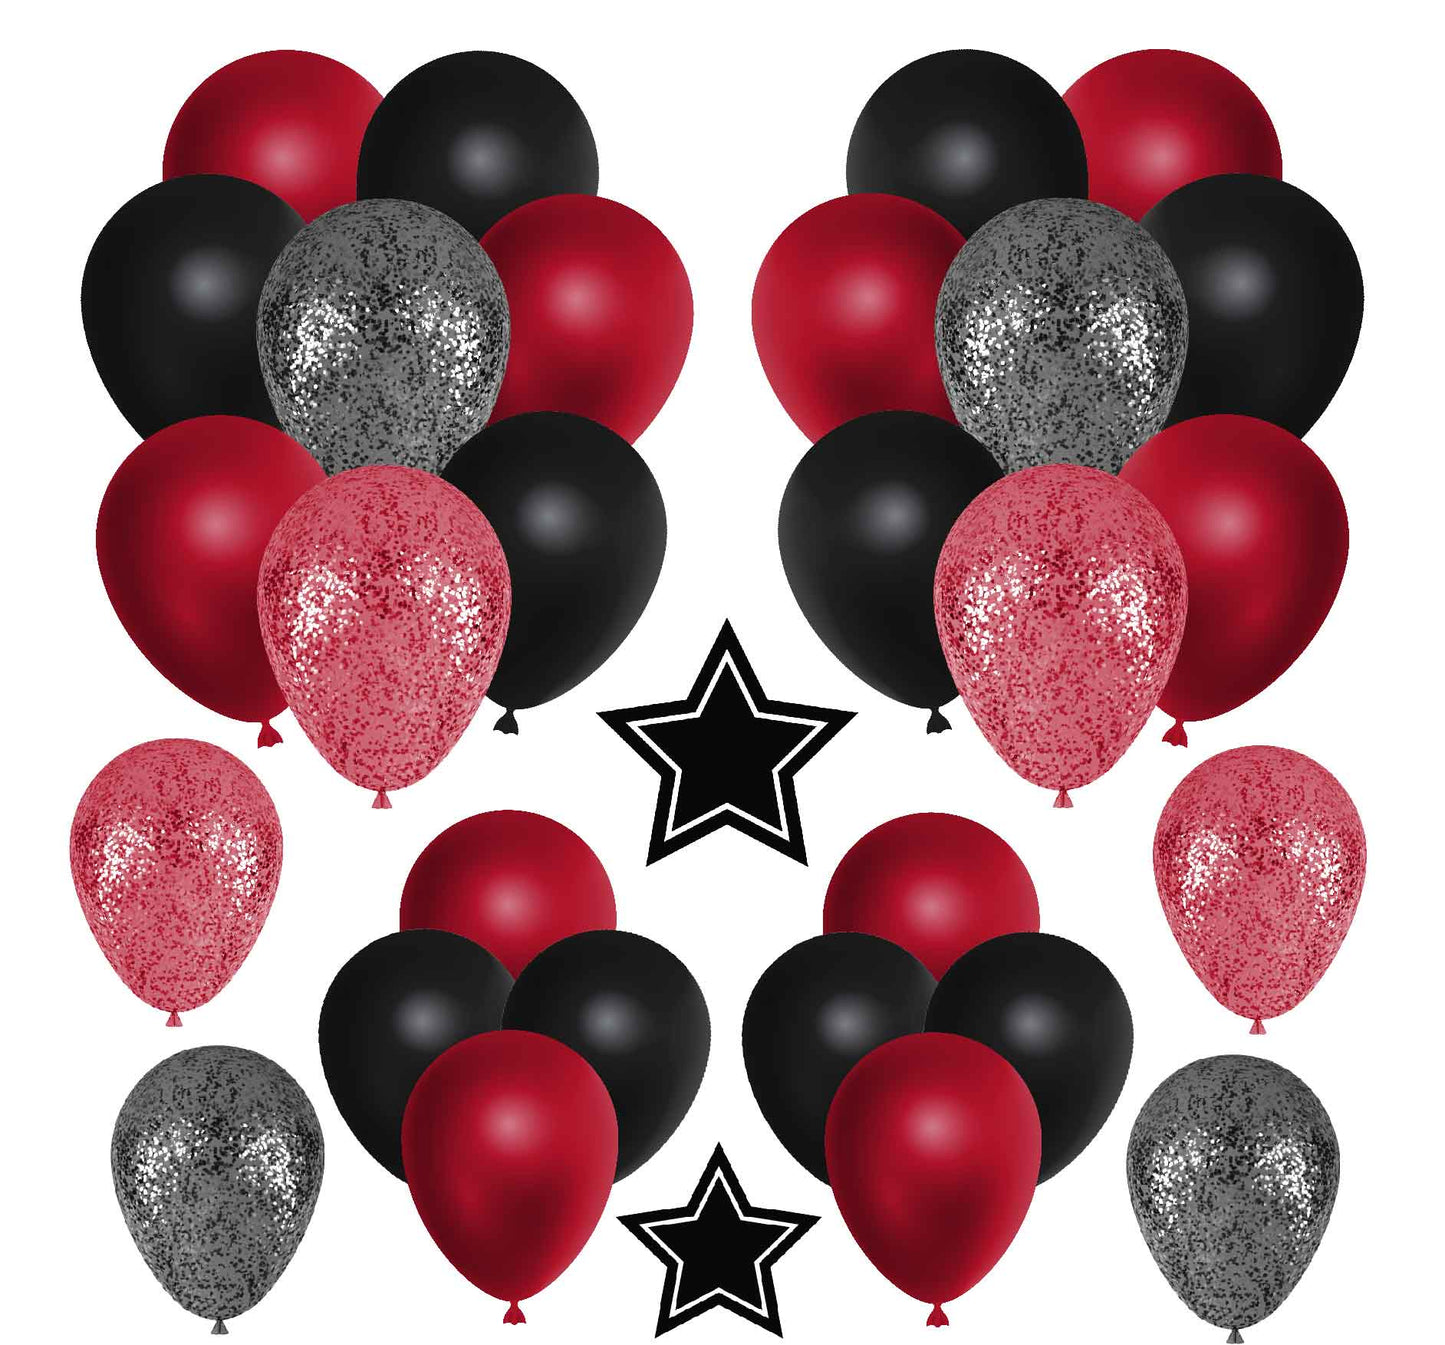 Red and Black Balloons Half Sheet Misc. (Must Purchase 2 Half sheets - You Can Mix & Match)